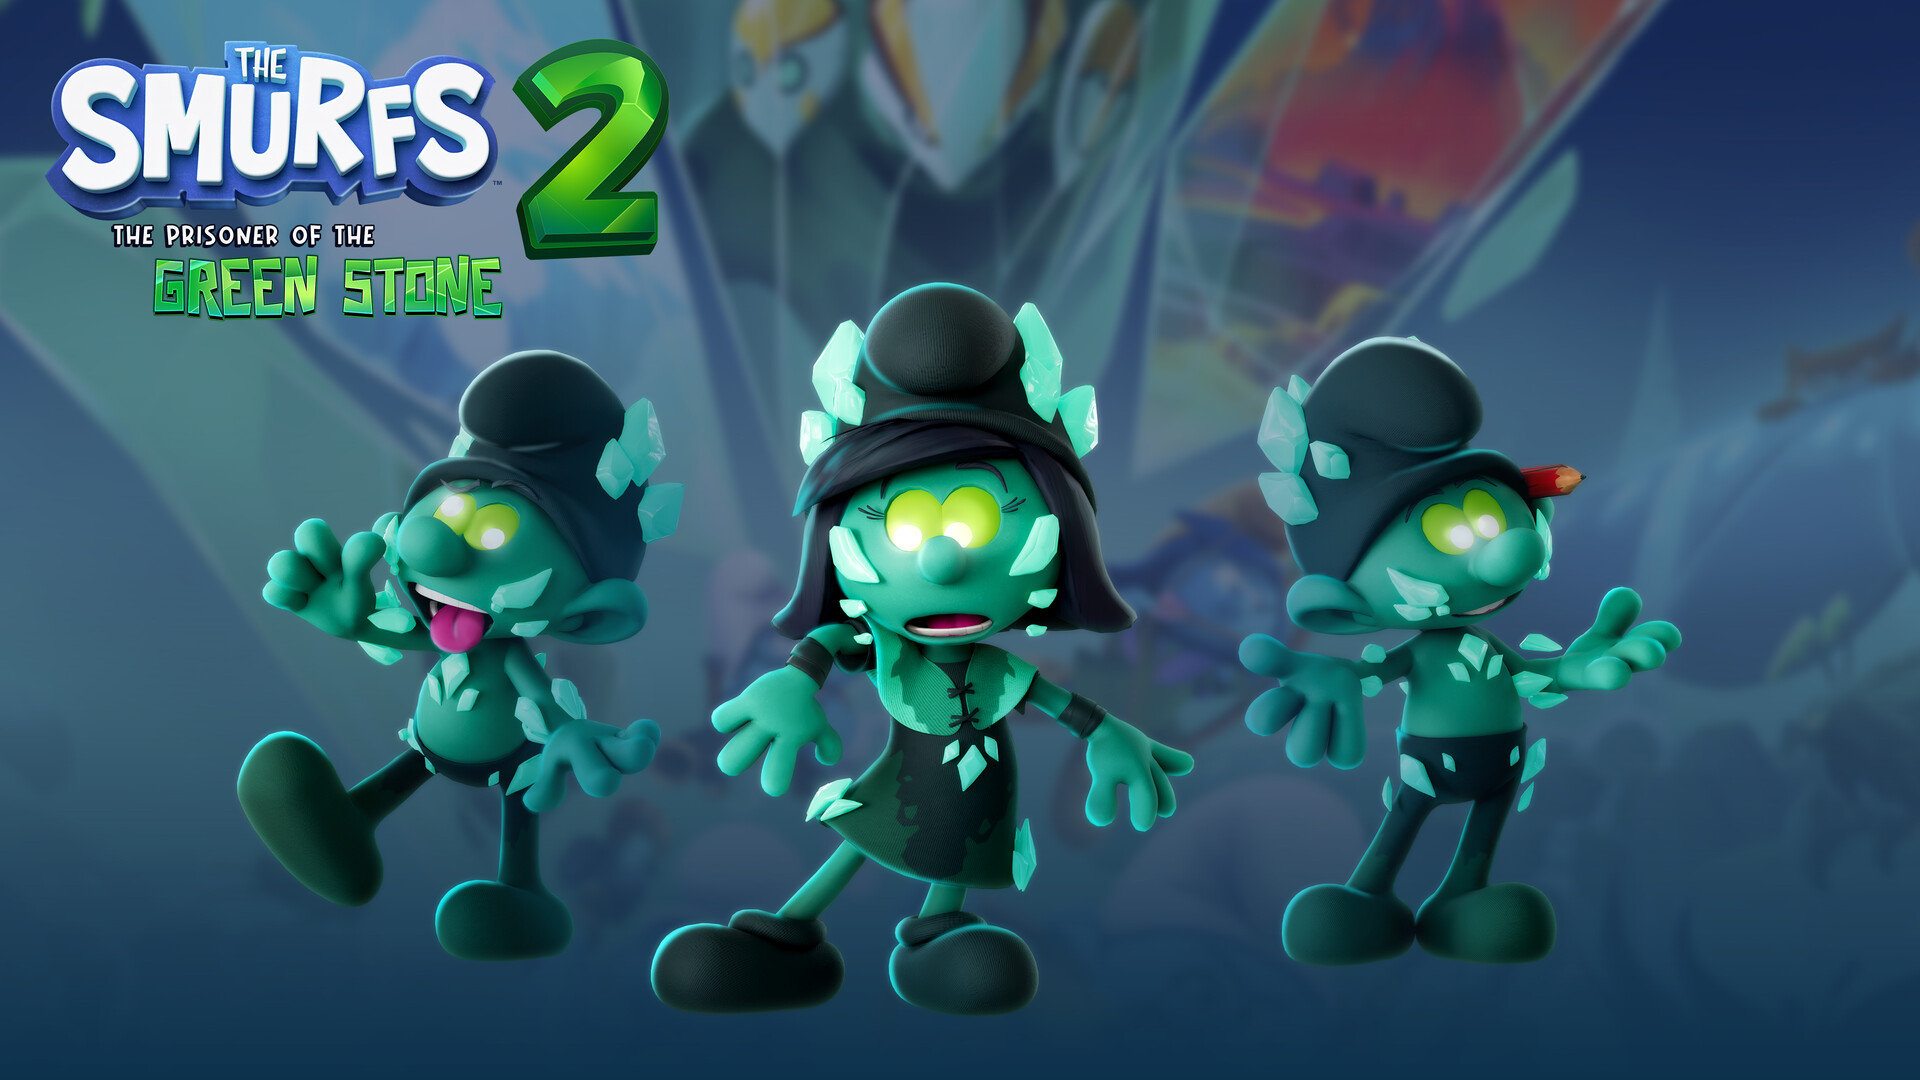 The Smurfs 2: The Prisoner of the Green Stone - Corrupted Outfit DLC GOG CD Key, 1.3$